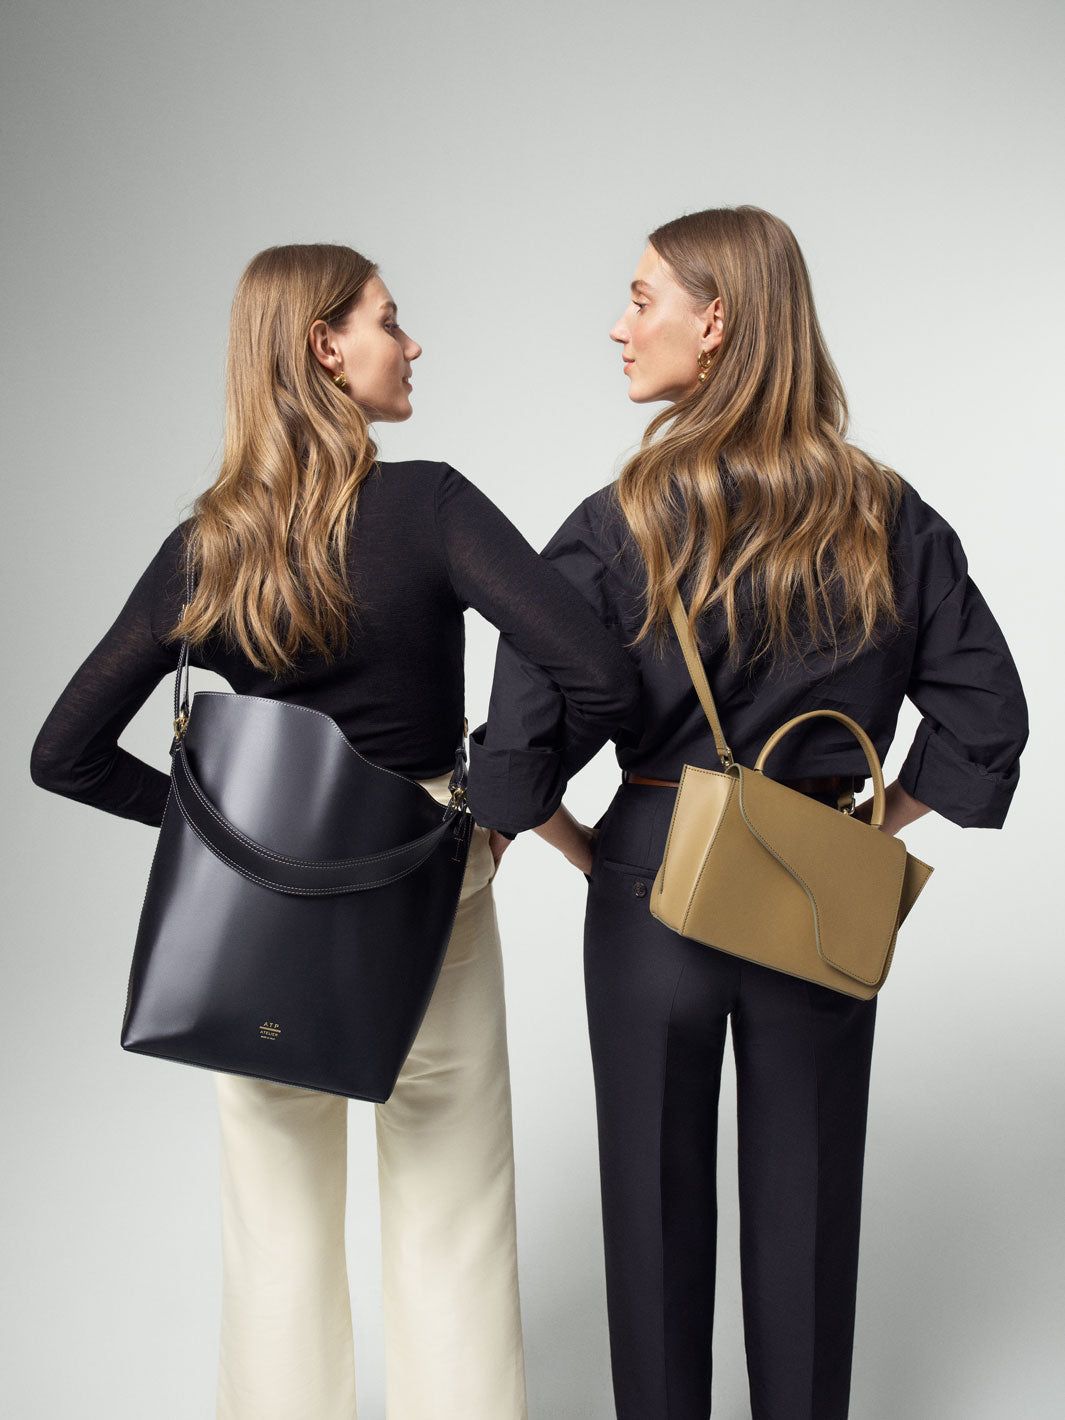 Large tote bags · Women's bags · Carried on the shoulder | A.P.C.